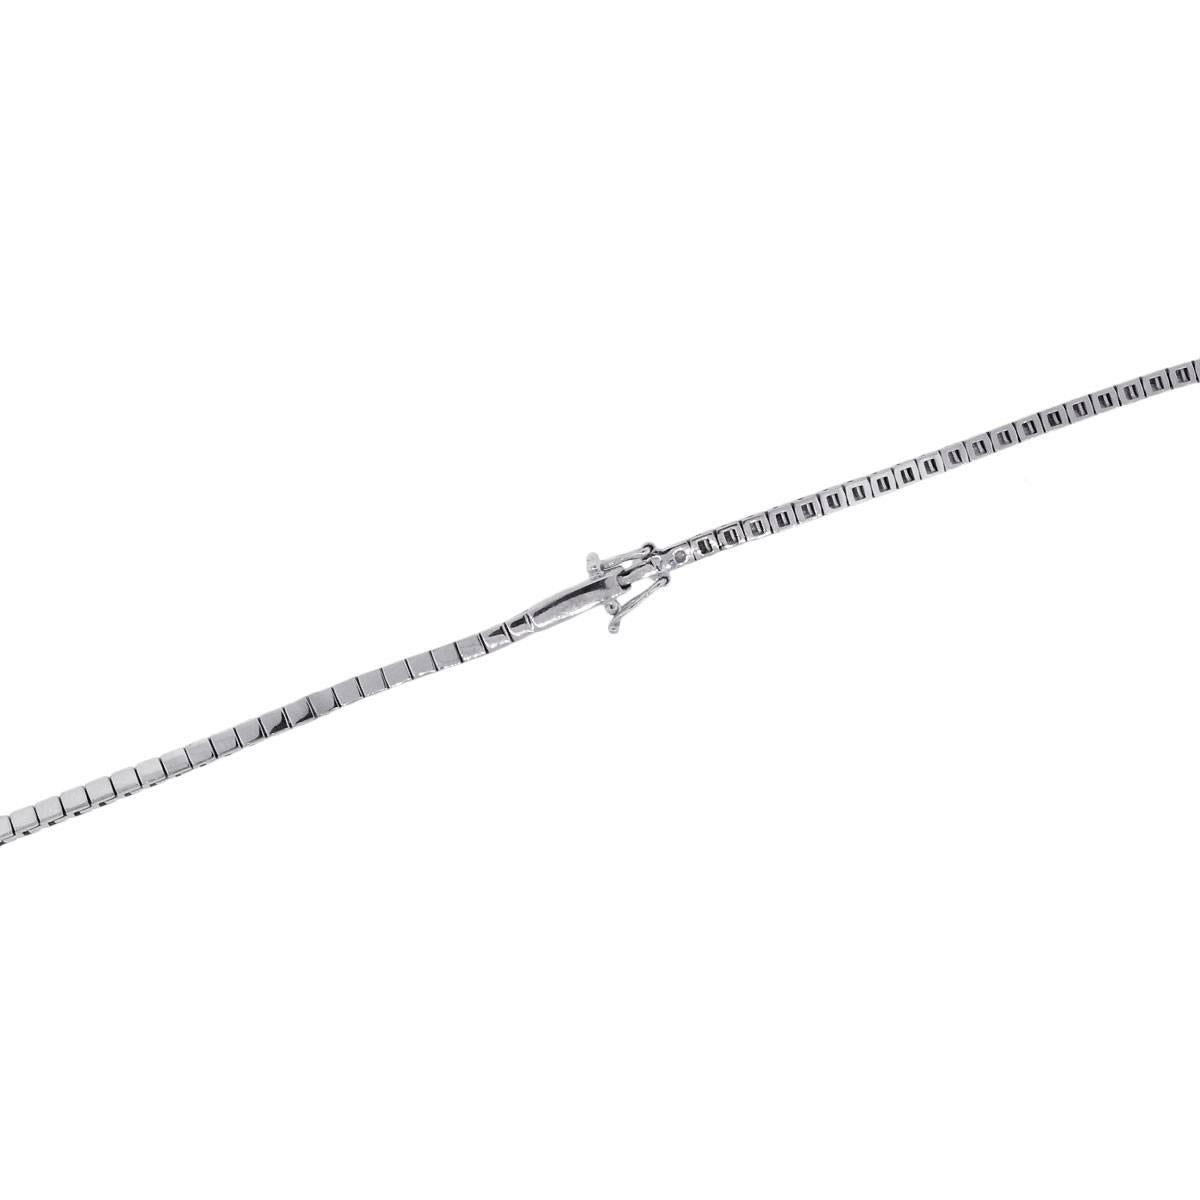 Material: 14k white gold
Diamond Details: Approximately 0.80ctw round brilliant diamonds. Diamonds are G in color and SI in clarity.
Clasp: Tongue in box Clasp
Total Weight: 12.5g (8.0dwt)
Length: 18″
Additional Details: This item comes with a